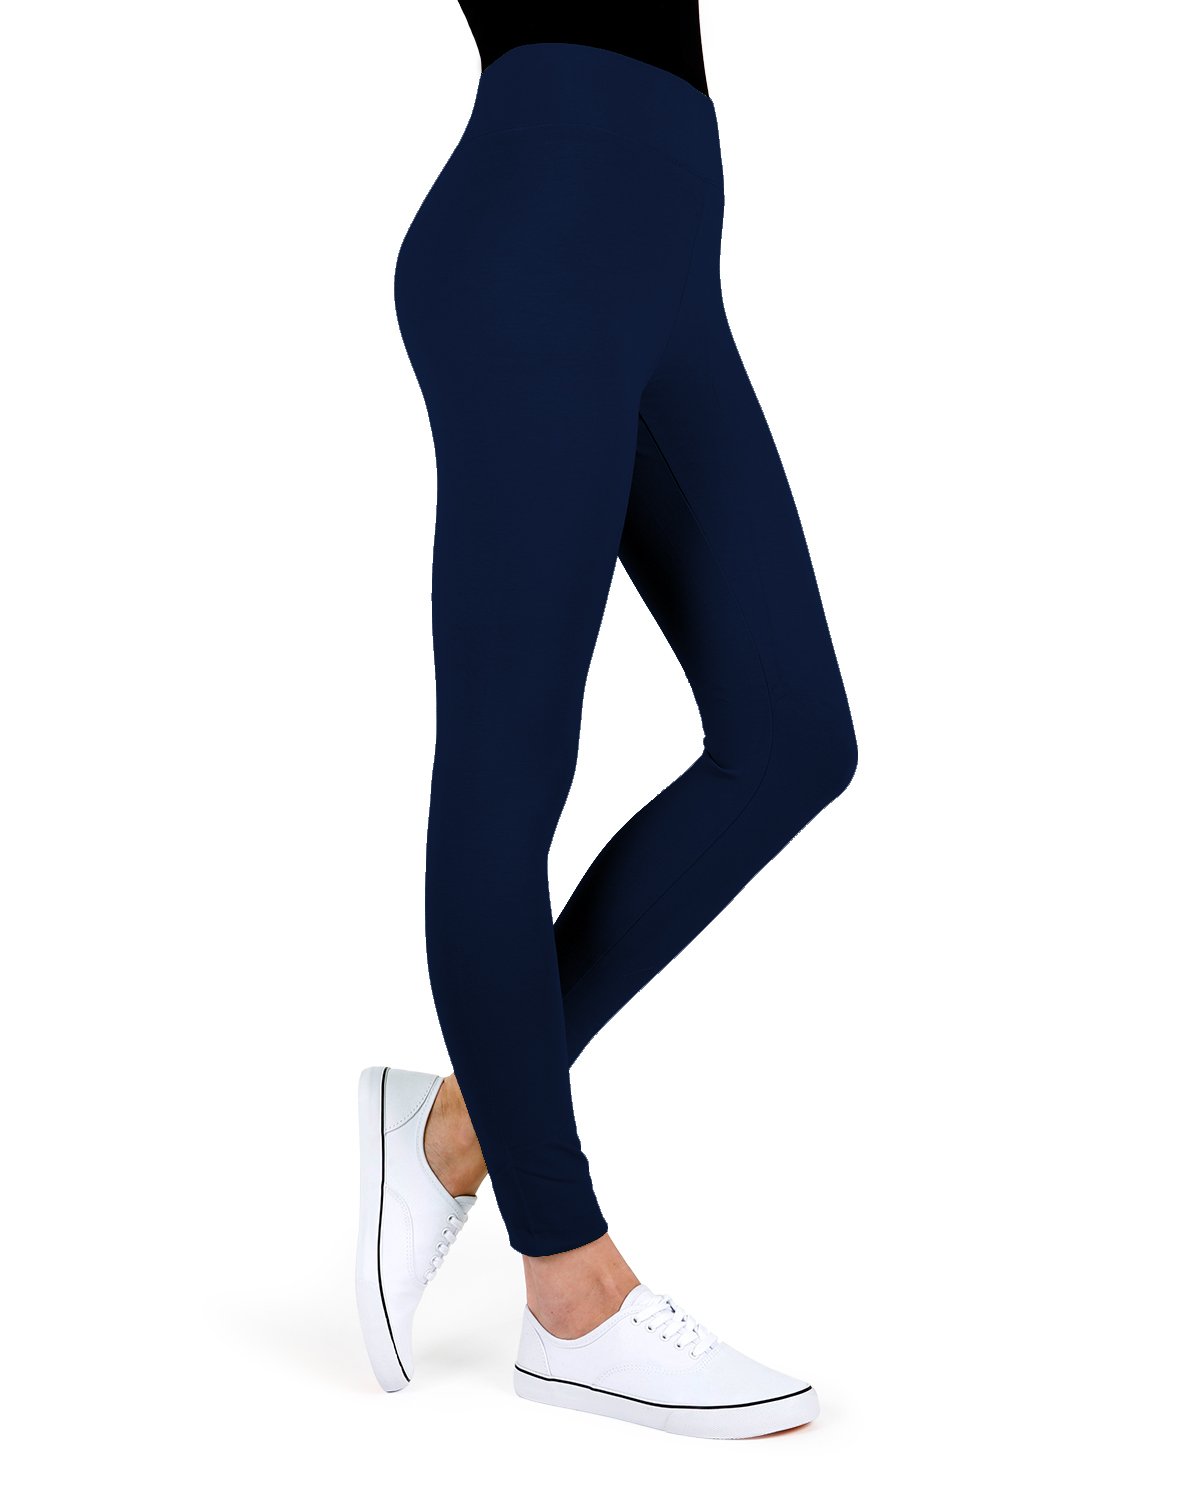 MeMoi Cotton-Blend Breathable Athletic Yoga Pants Available in Multiple  Colors | eBay